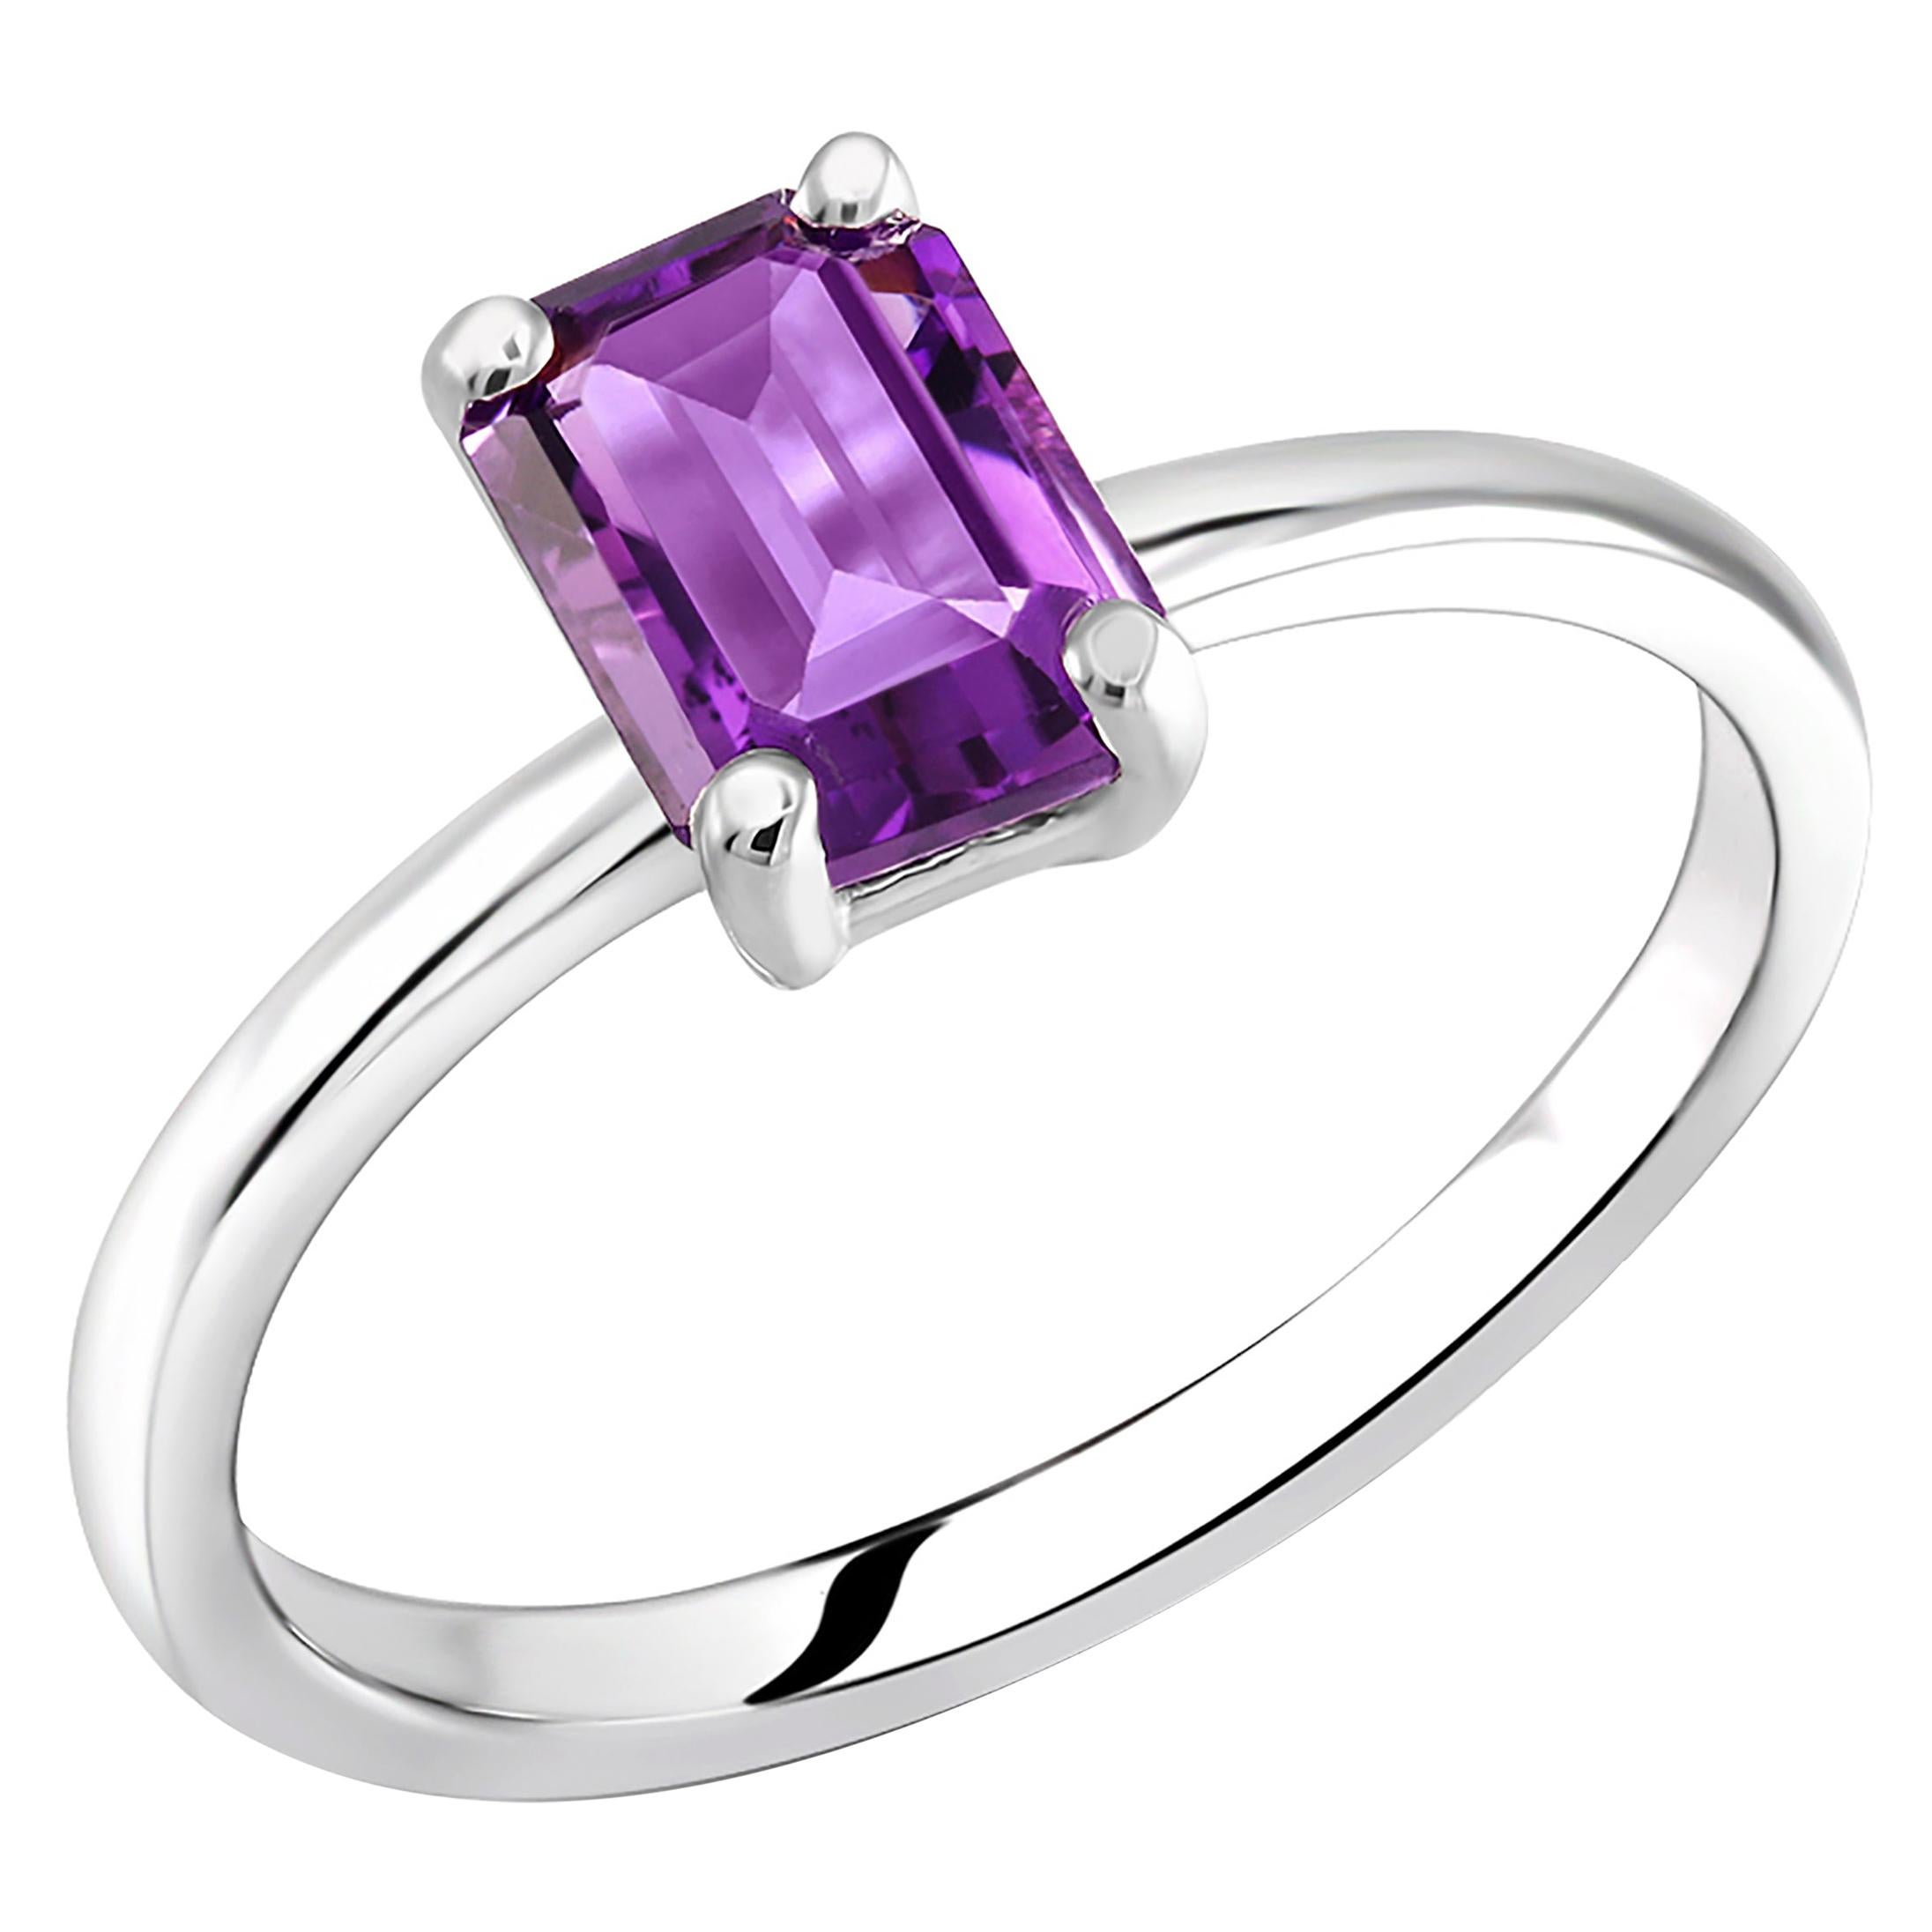 Emerald Cut Amethyst Solitaire Sterling Silver Ring